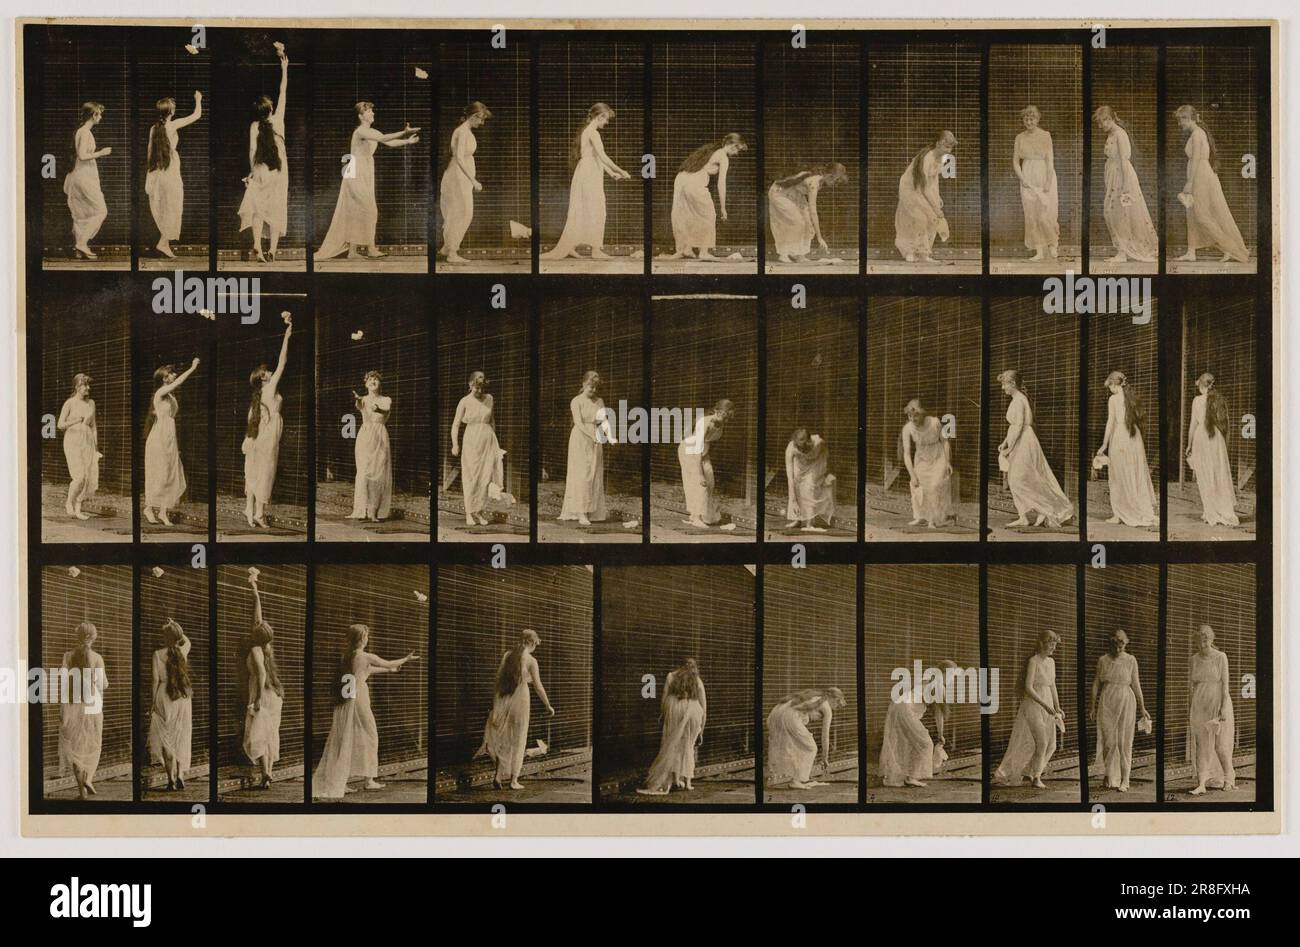 Woman Throwing Handkerchief in Air, Picking It Up, from the book Animal Locomotion ca. 1887 by Eadweard Muybridge, born Kingston-upon-Thames, England 1830-died Kingston-upon-Thames, England 1904 Stock Photo